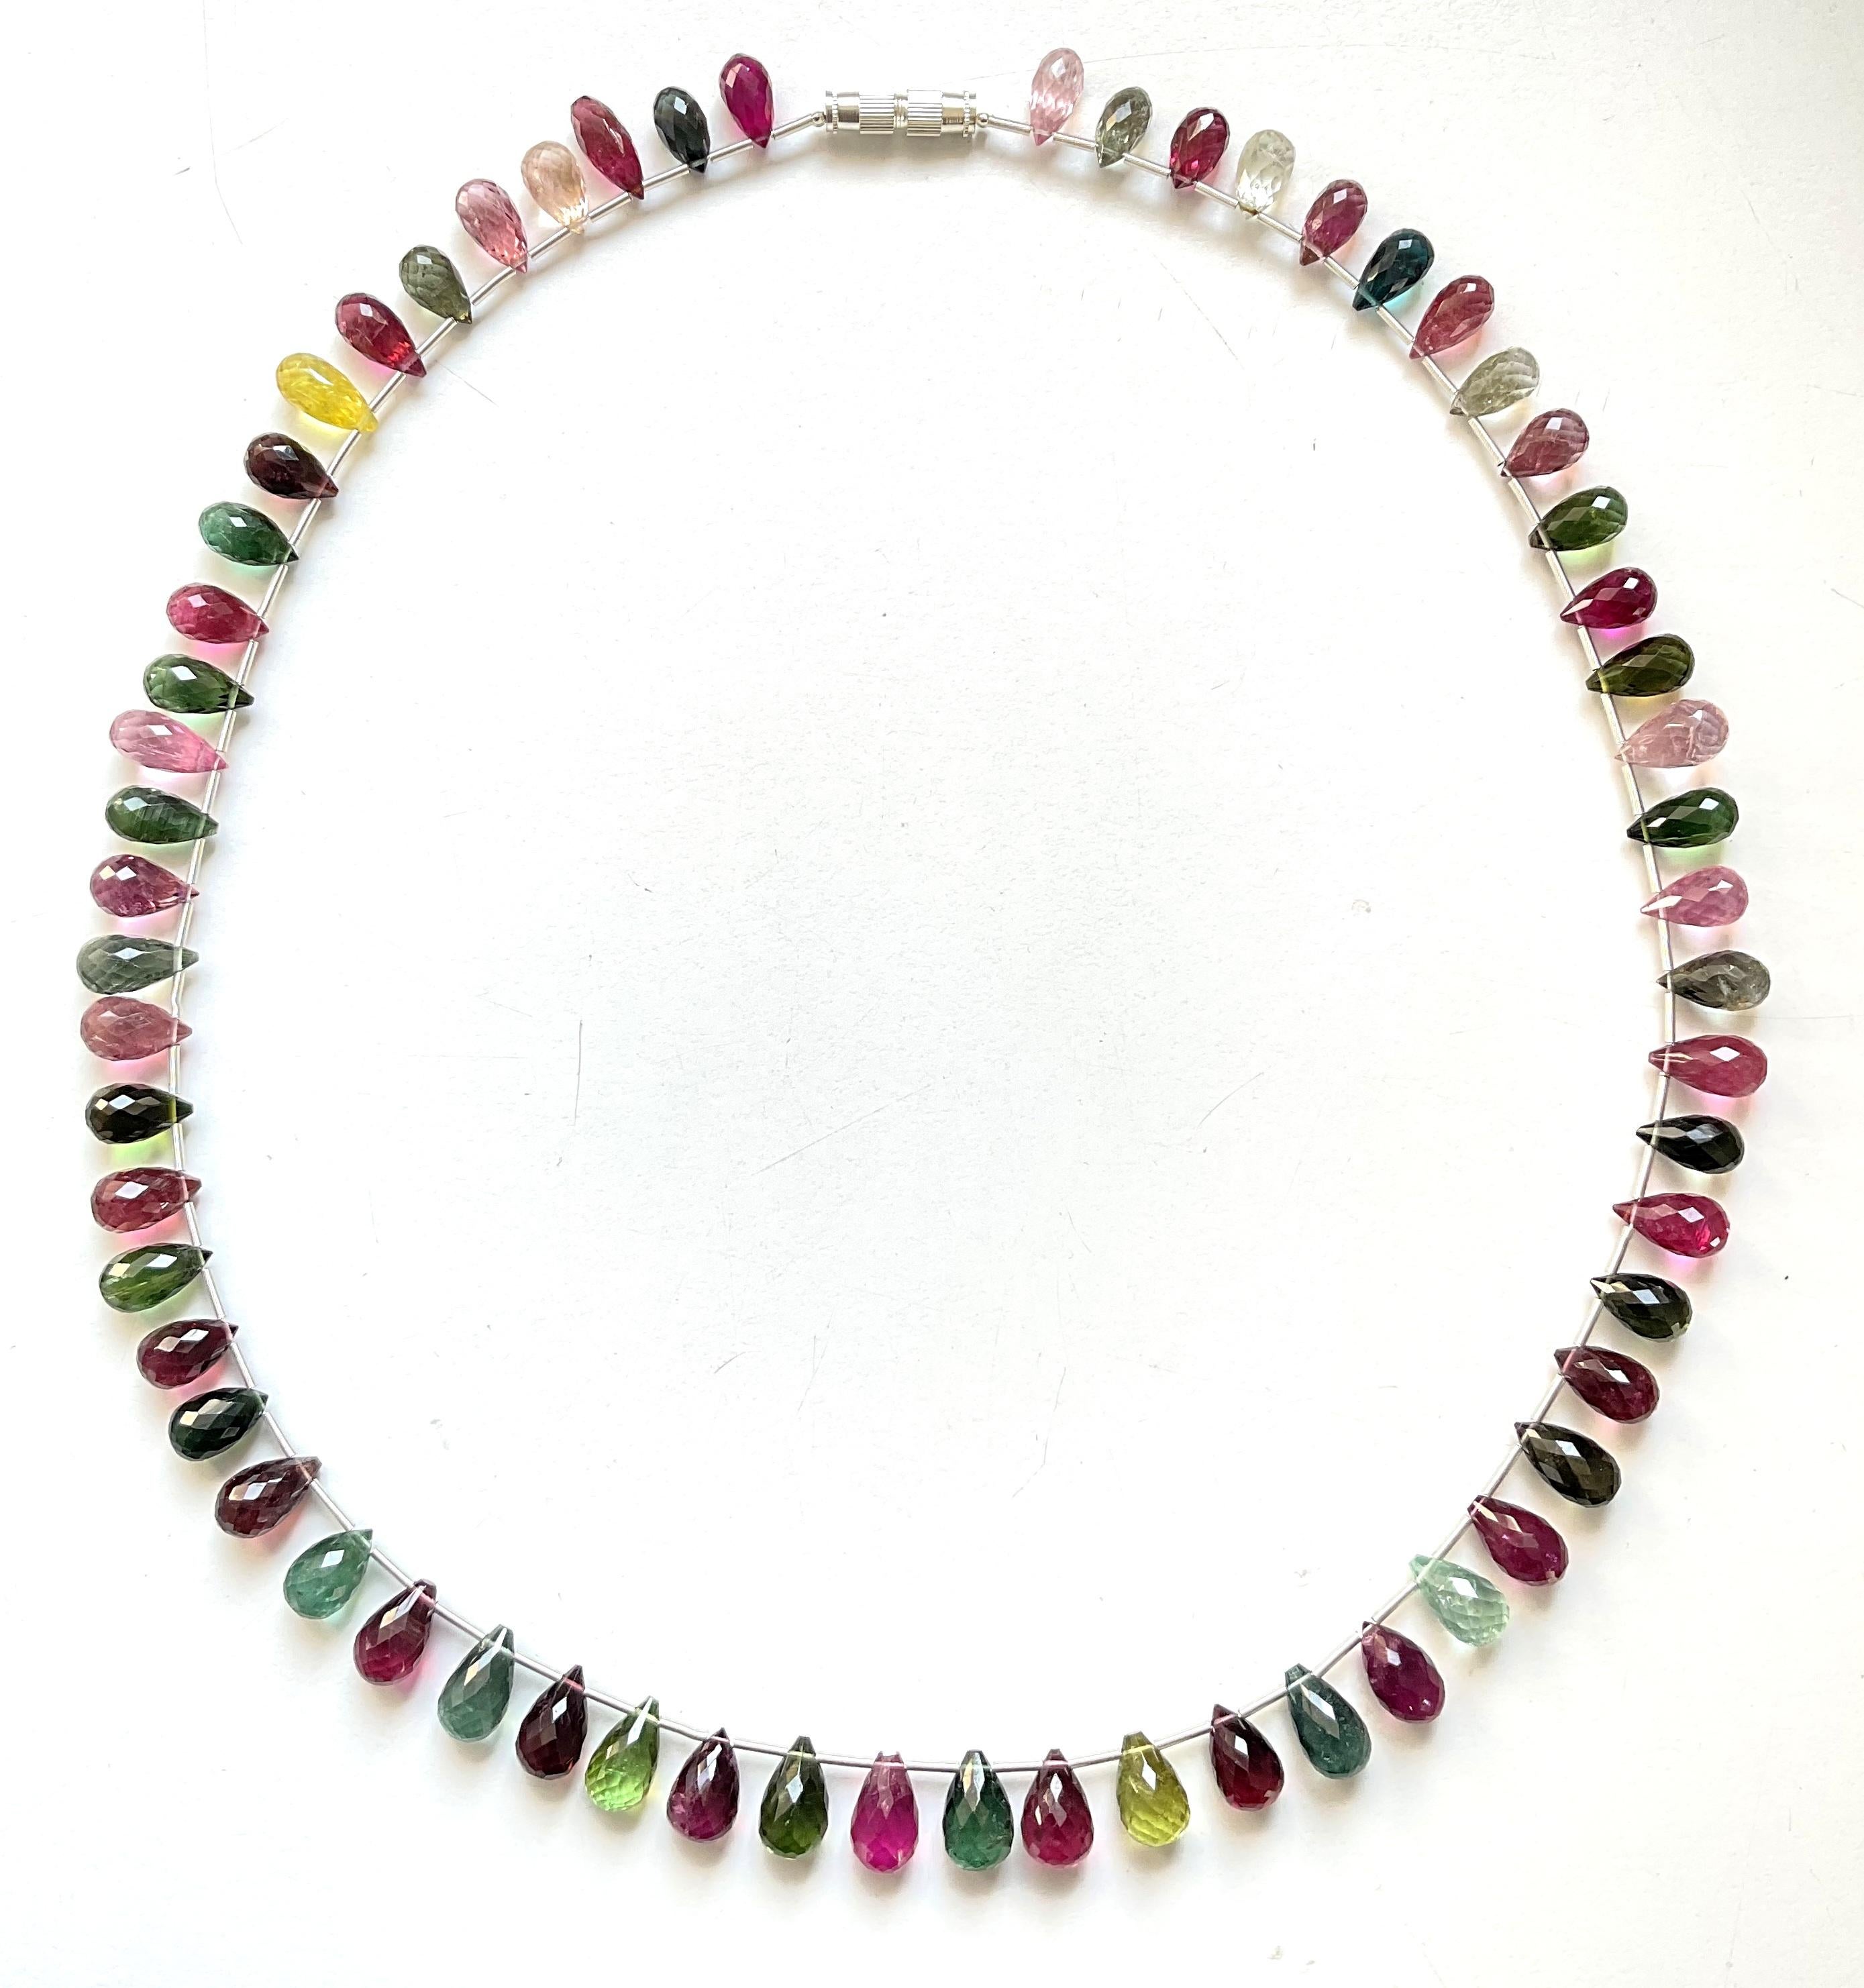 Multi Color 176.64 Carats Tourmaline Top Quality Natural Faceted Drops Necklace

Weight: 176.64 Carats
Size: 5x10 To 6x10 MM
Shape: Faceted Drops
Quantity: 1 Strand
